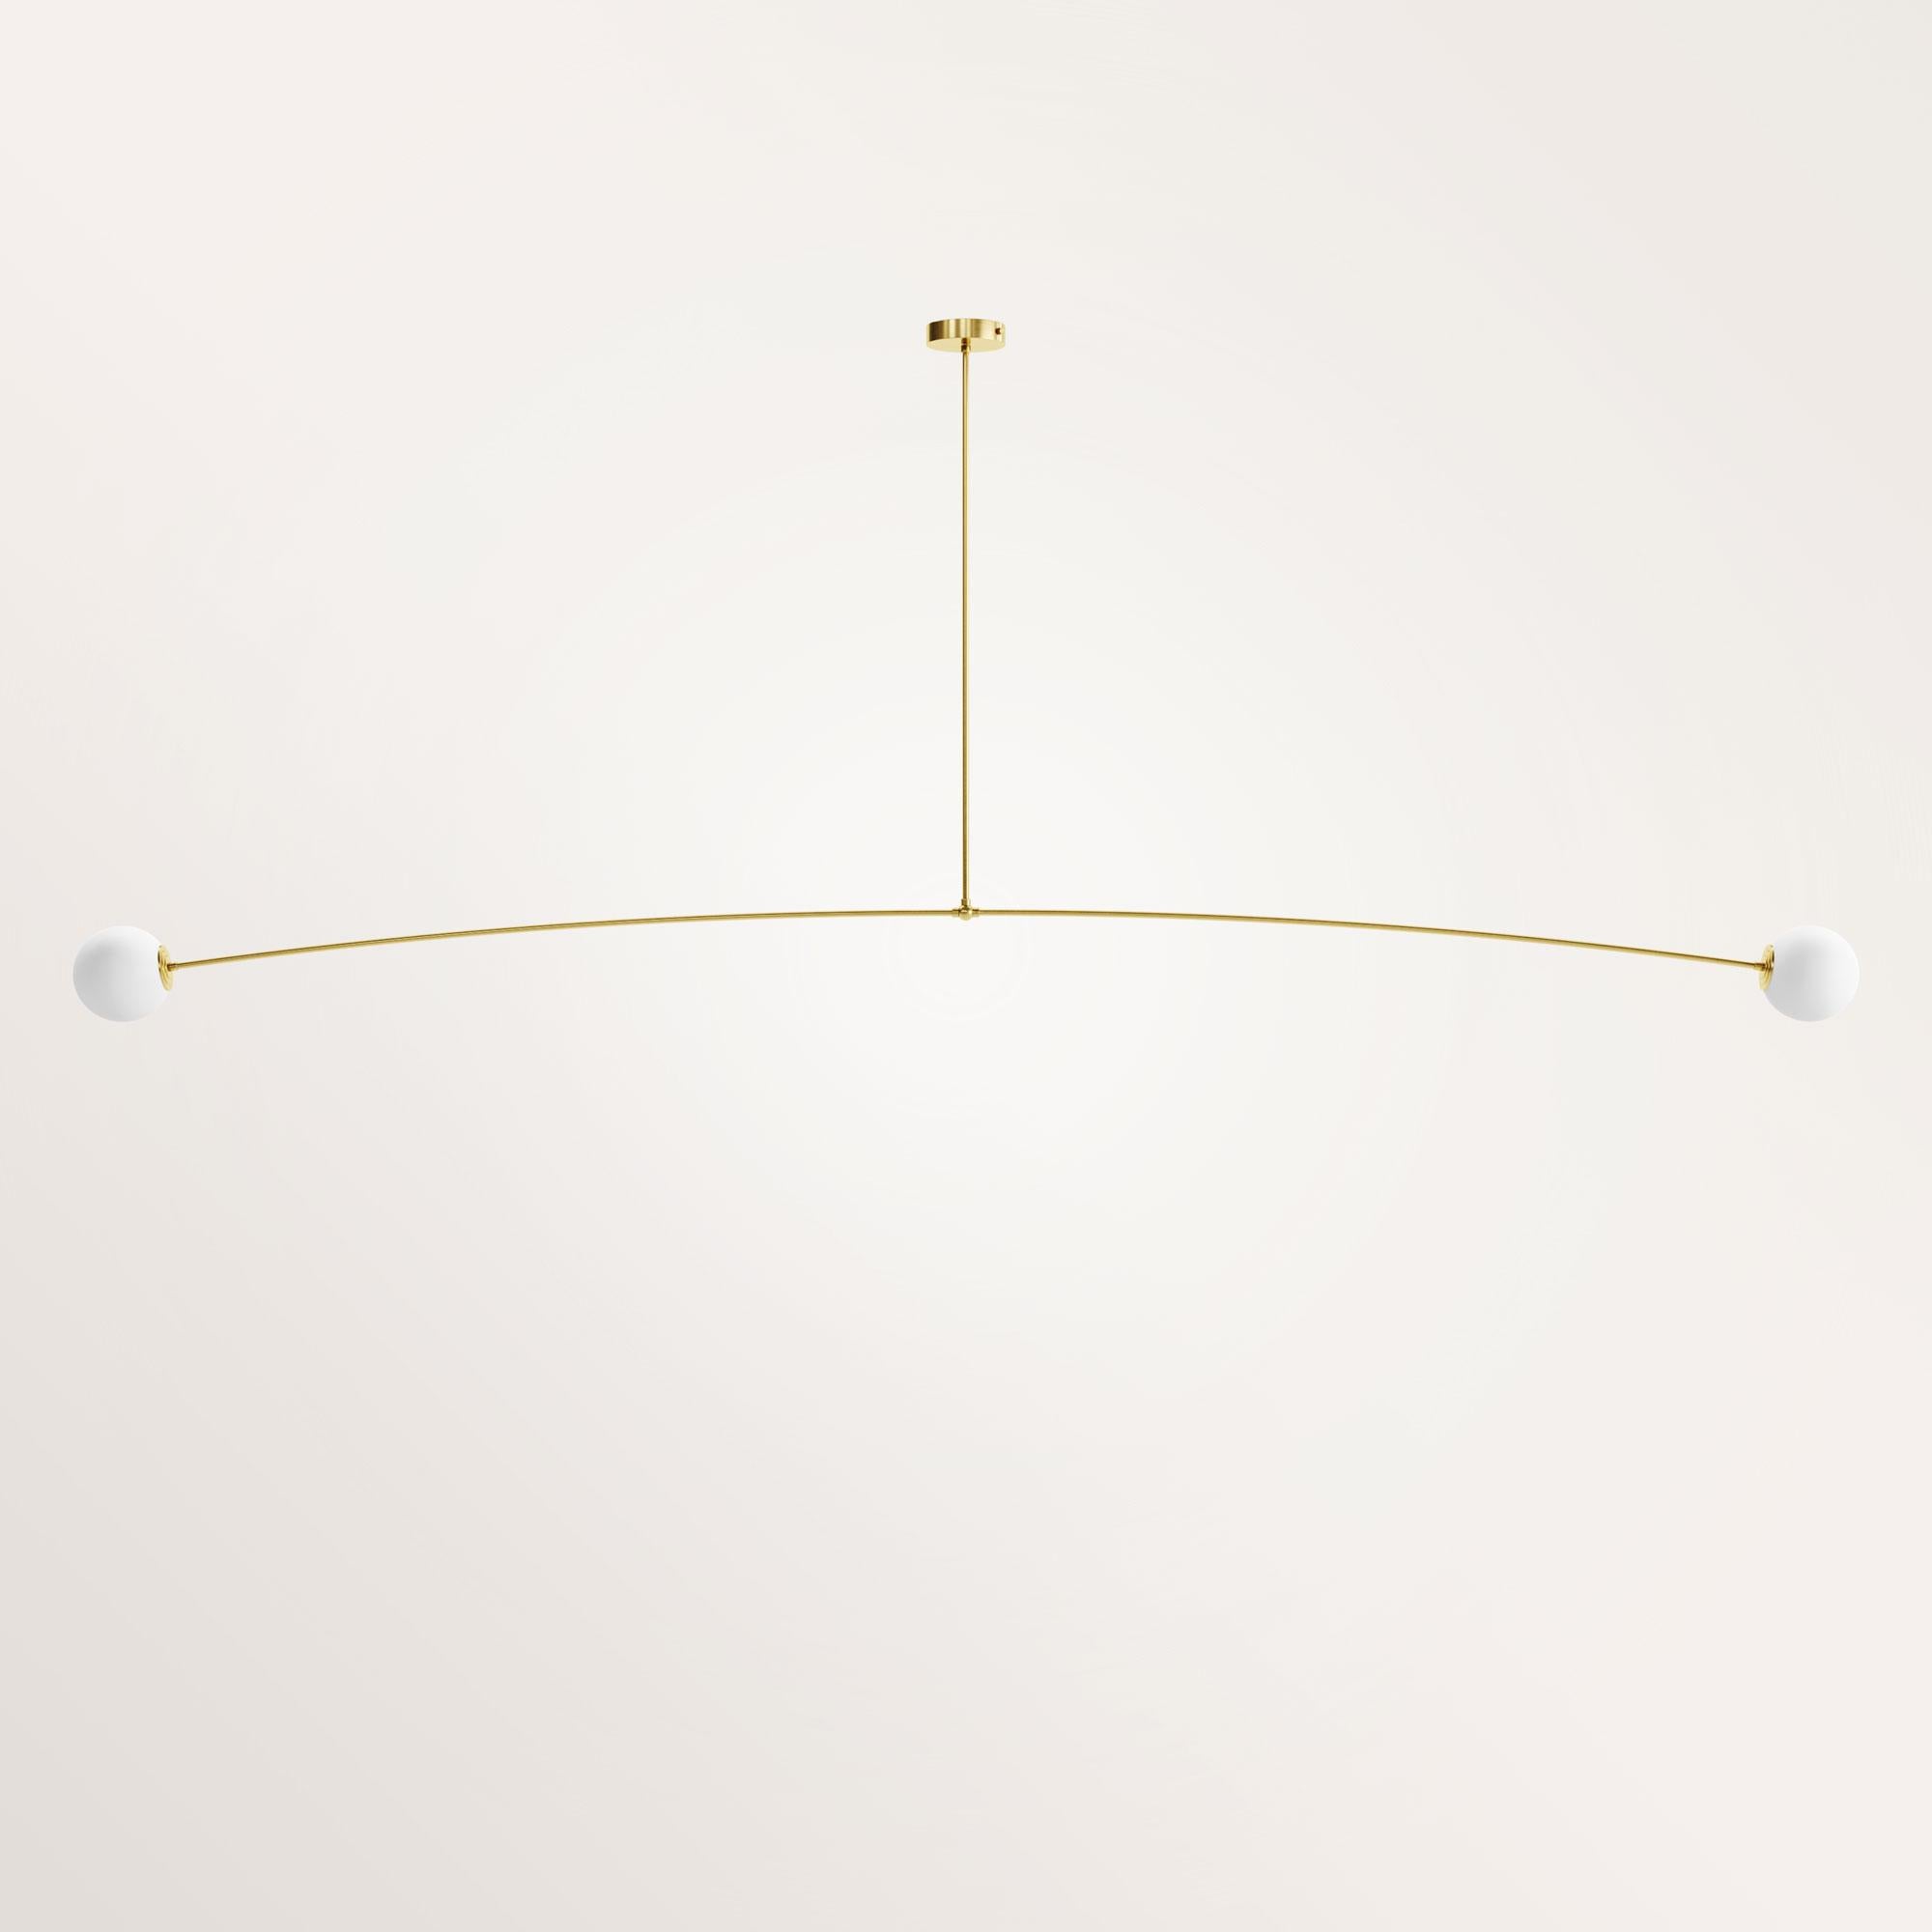 Handmade medium Nemesis I chandelier by Gobo Lights
Dimensions: 220 L X 12 l X 100 H
Materials: brass, opaline

Nemesis is the Greek Goddess of fair anger, revenge and balance which has inspired this light. 

Self-taught and from the world of